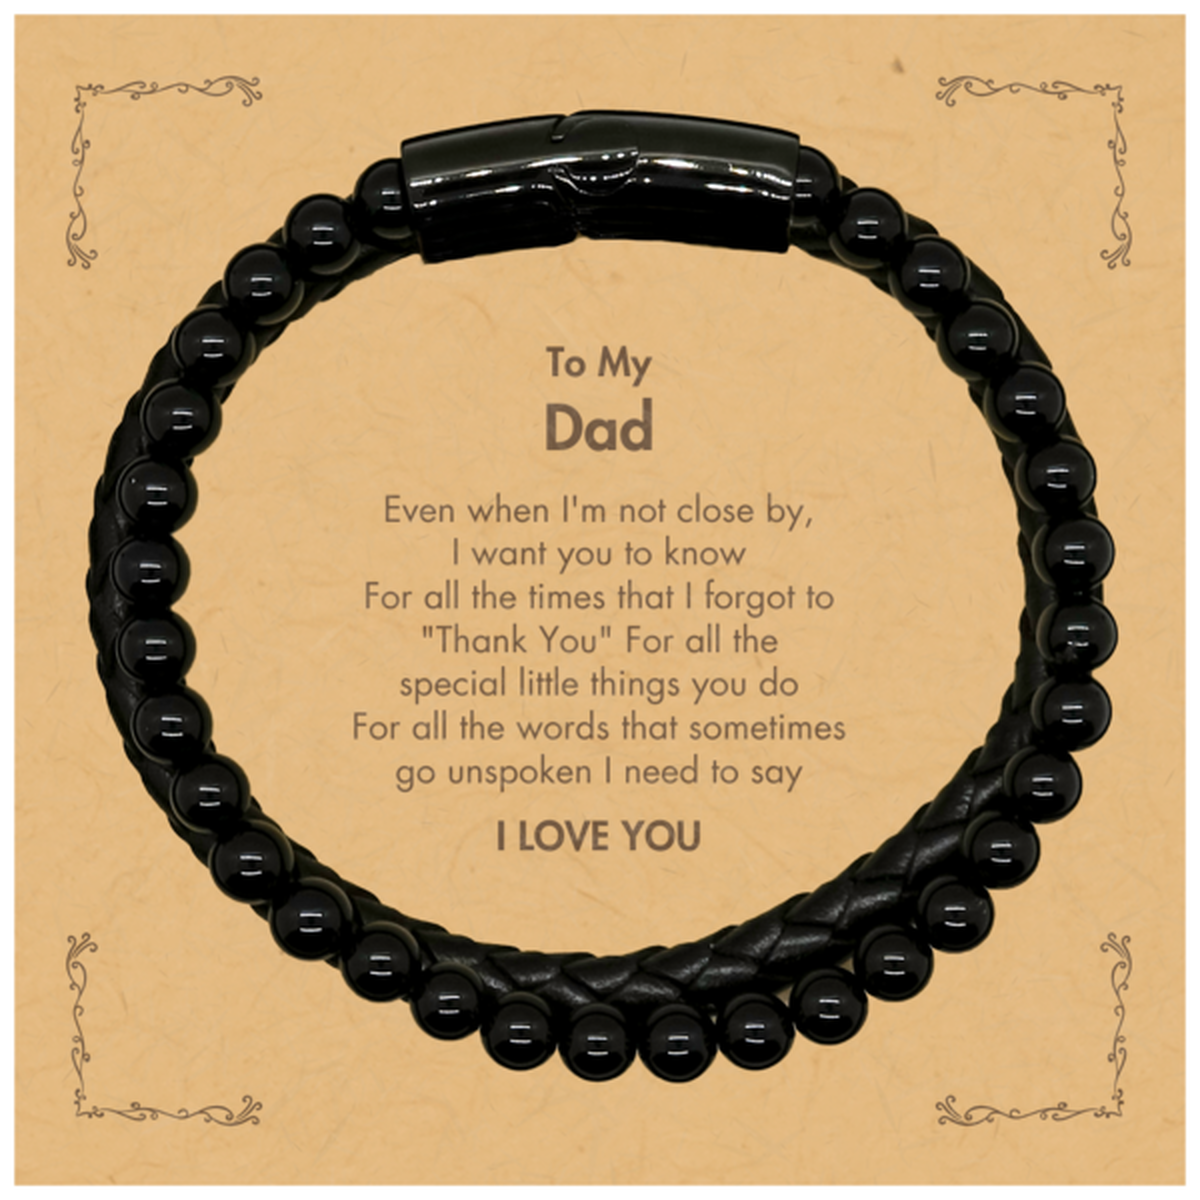 Thank You Gifts for Dad, Keepsake Stone Leather Bracelets Gifts for Dad Birthday Mother's day Father's Day Dad For all the words That sometimes go unspoken I need to say I LOVE YOU